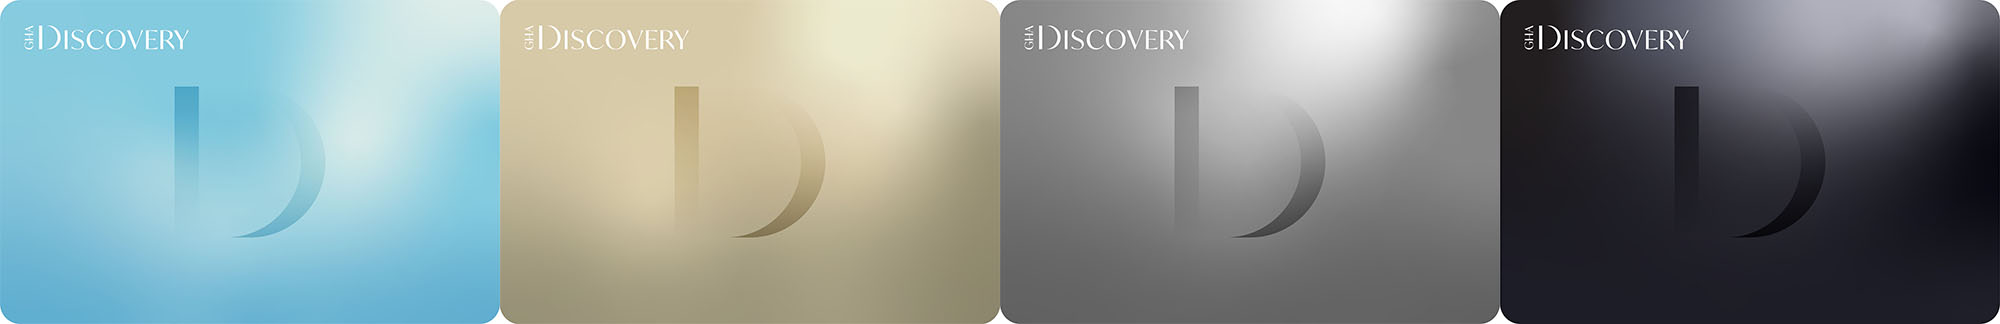 DISCOVERY hotel membership cards and tiers